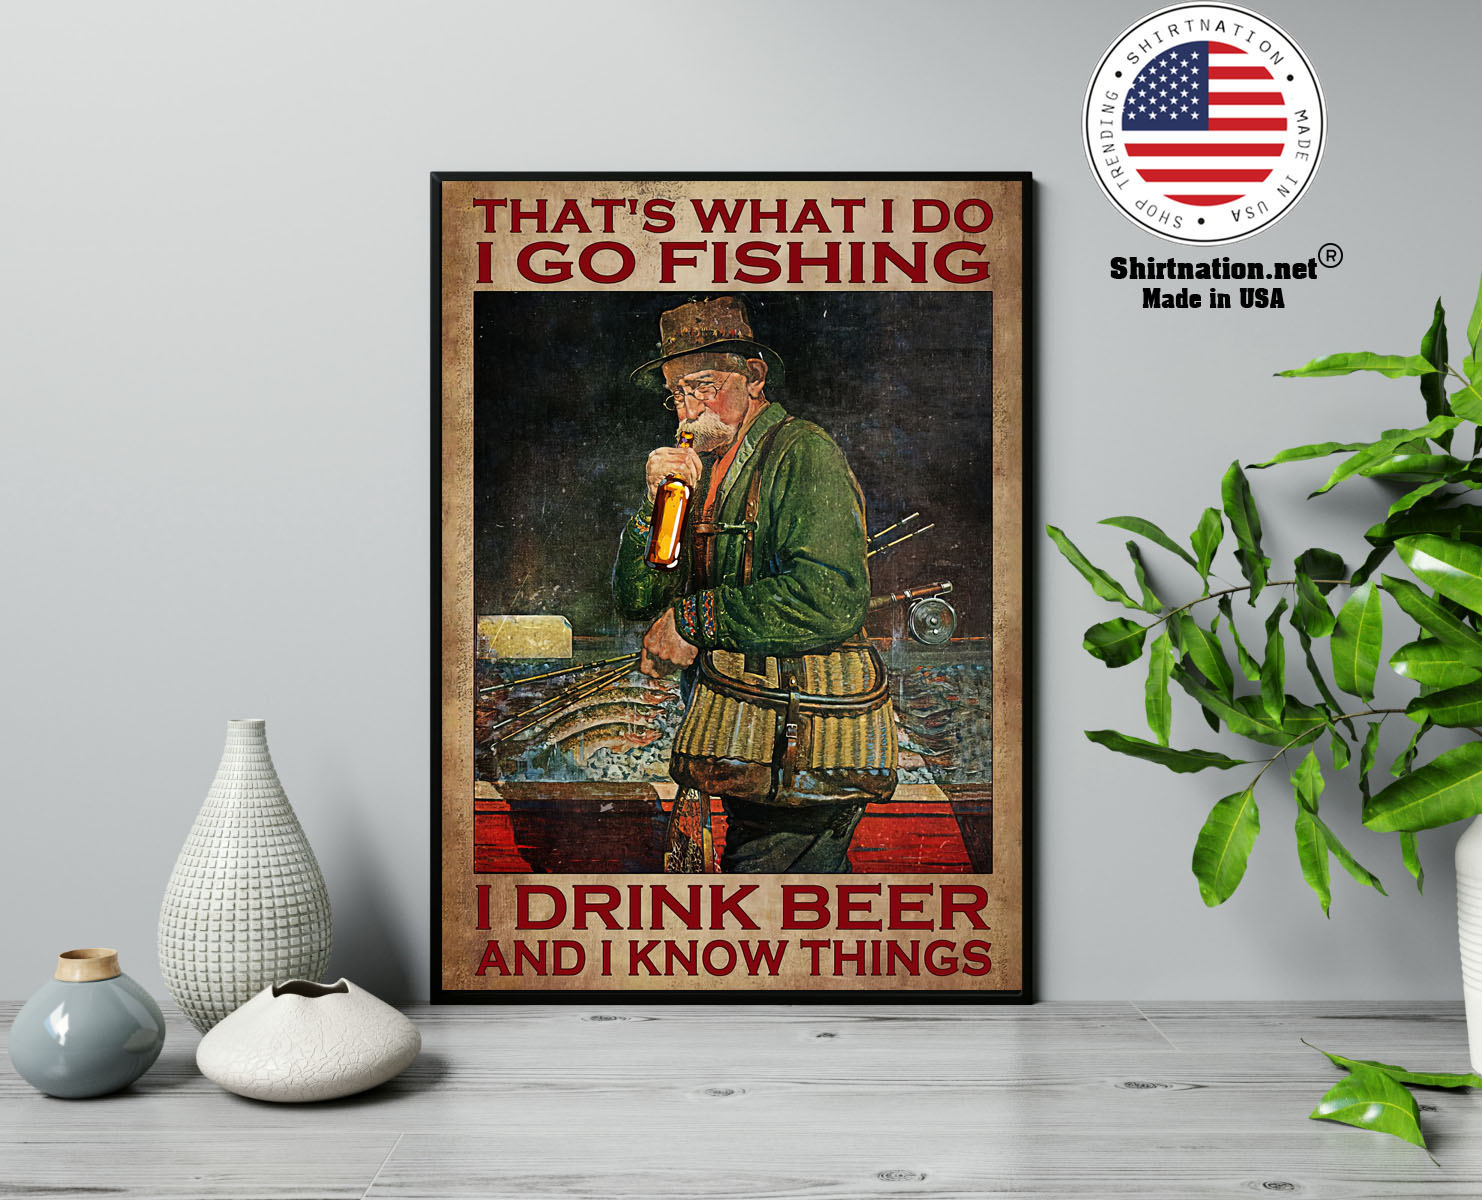 Old man Thats what I do I go fishing I drink beer and I know things poster 13